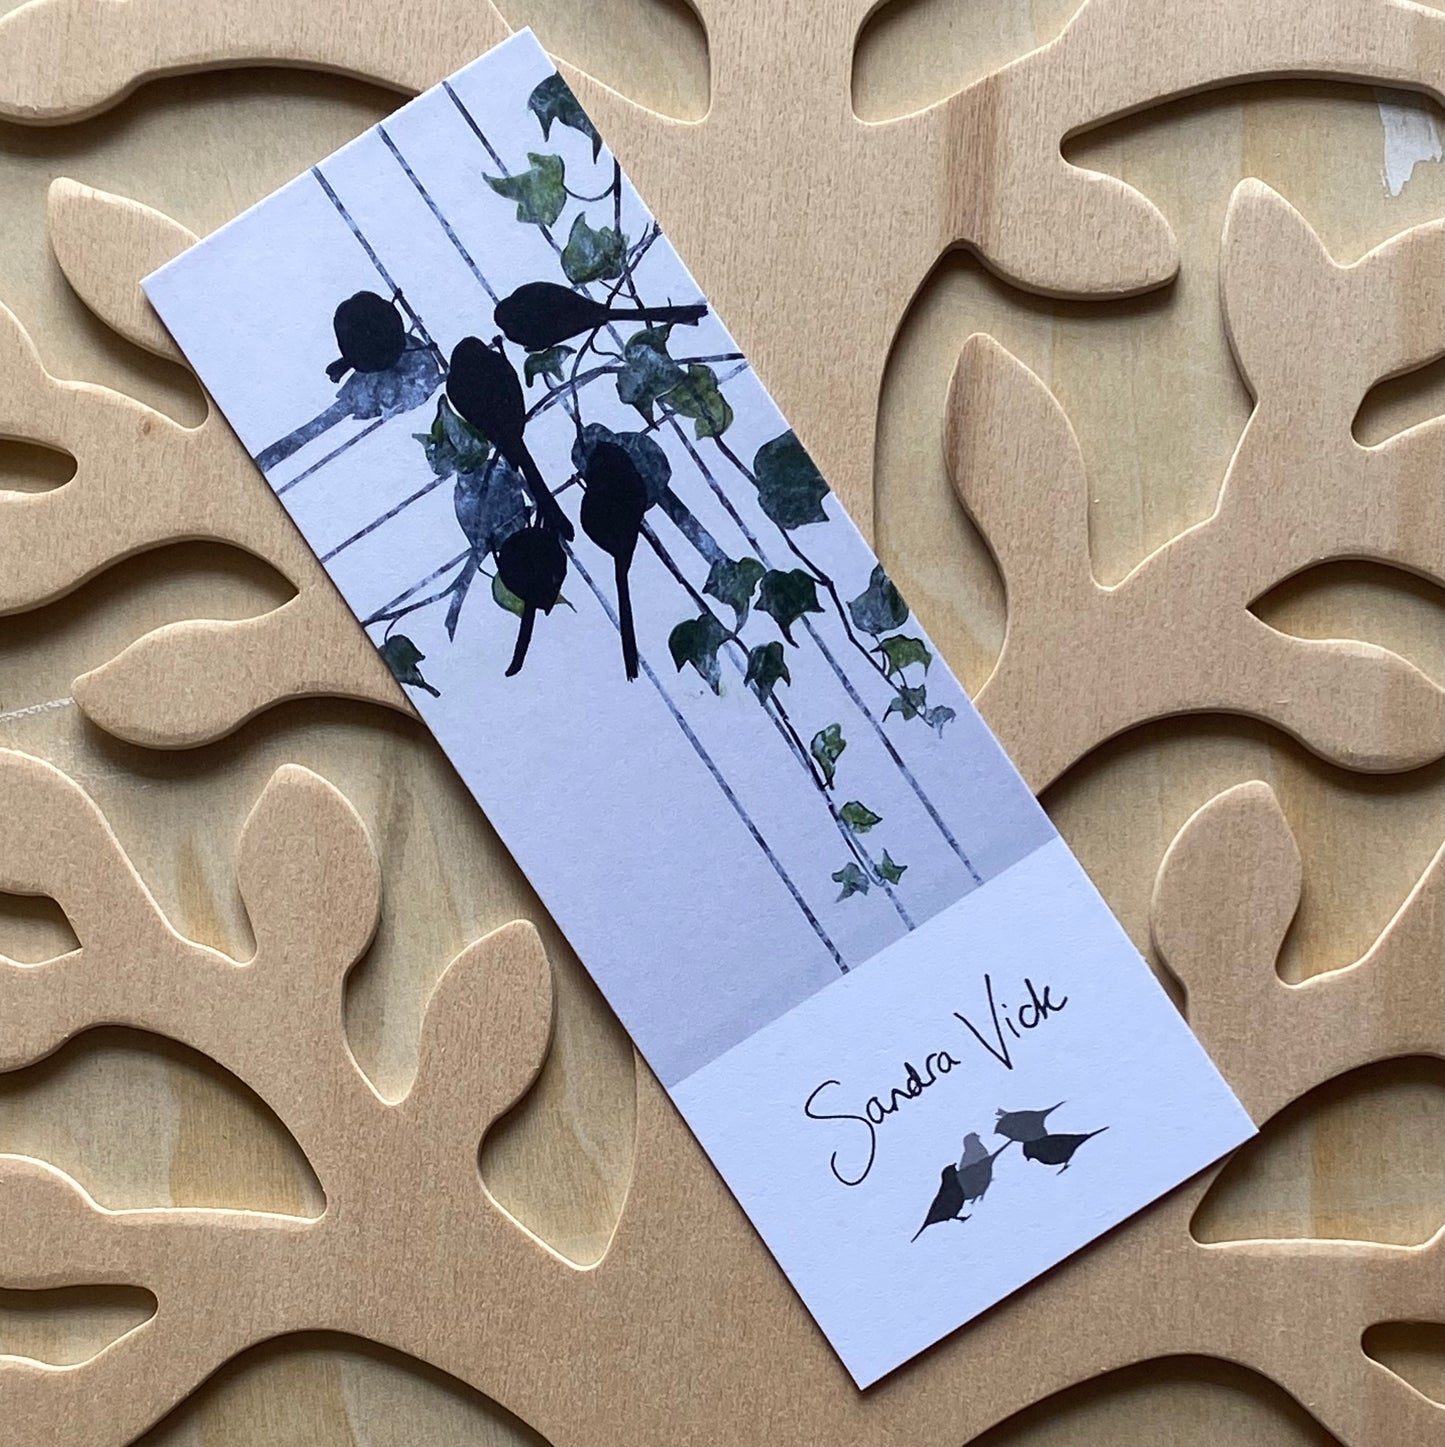 BOOKMARK: long-tailed tits and ivy